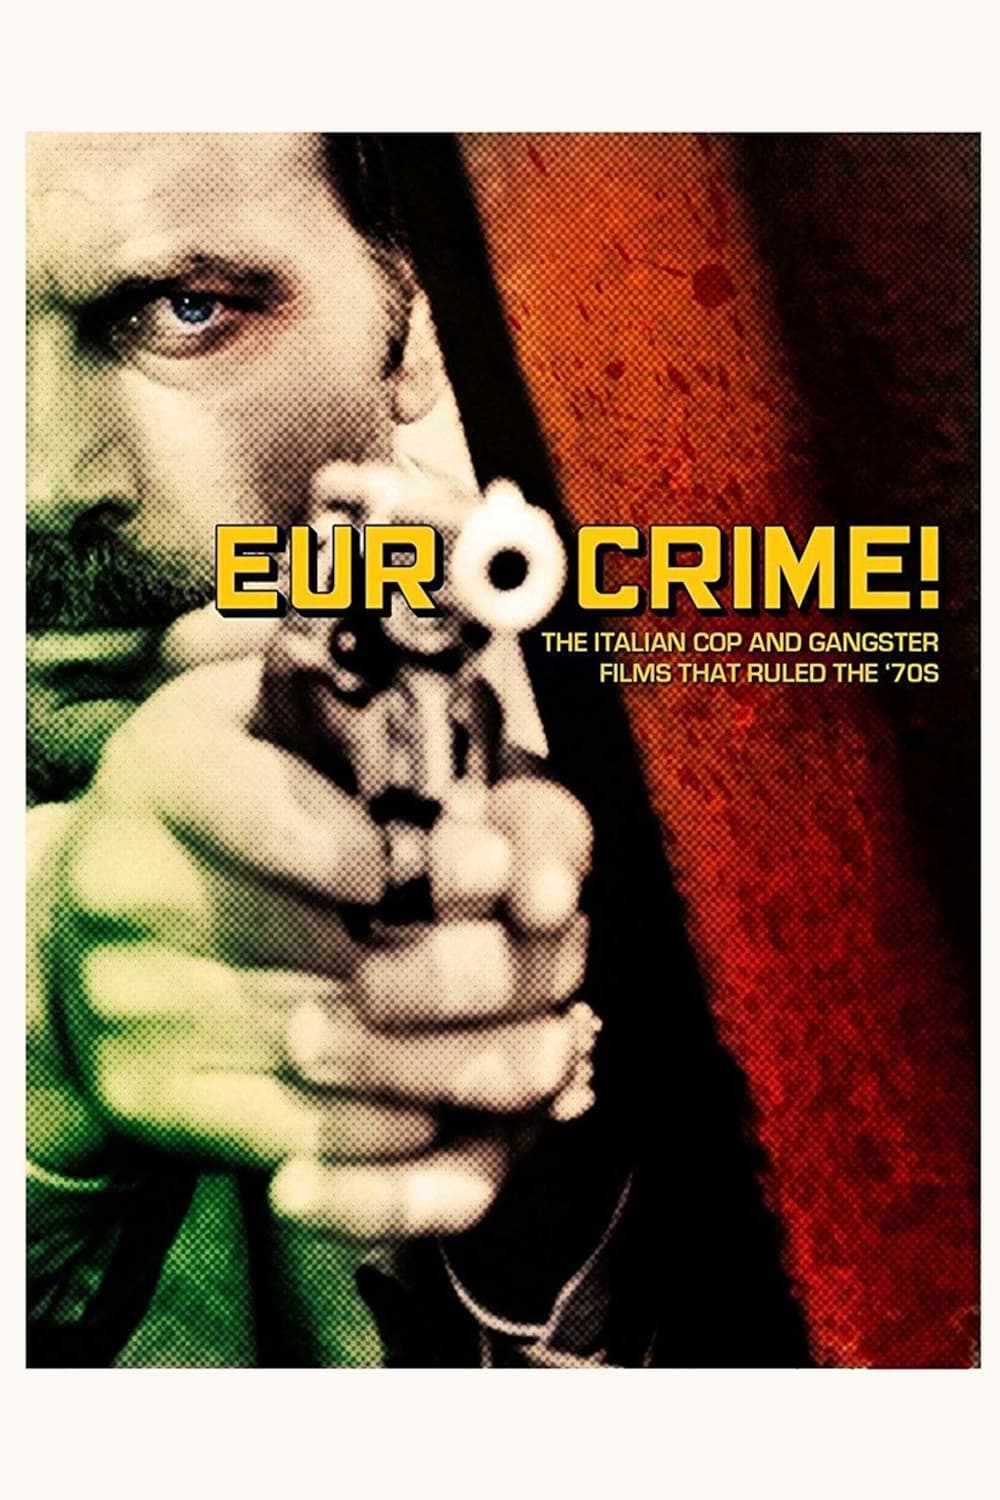 Eurocrime! The Italian Cop and Gangster Films That Ruled the '70s on FREECABLE TV